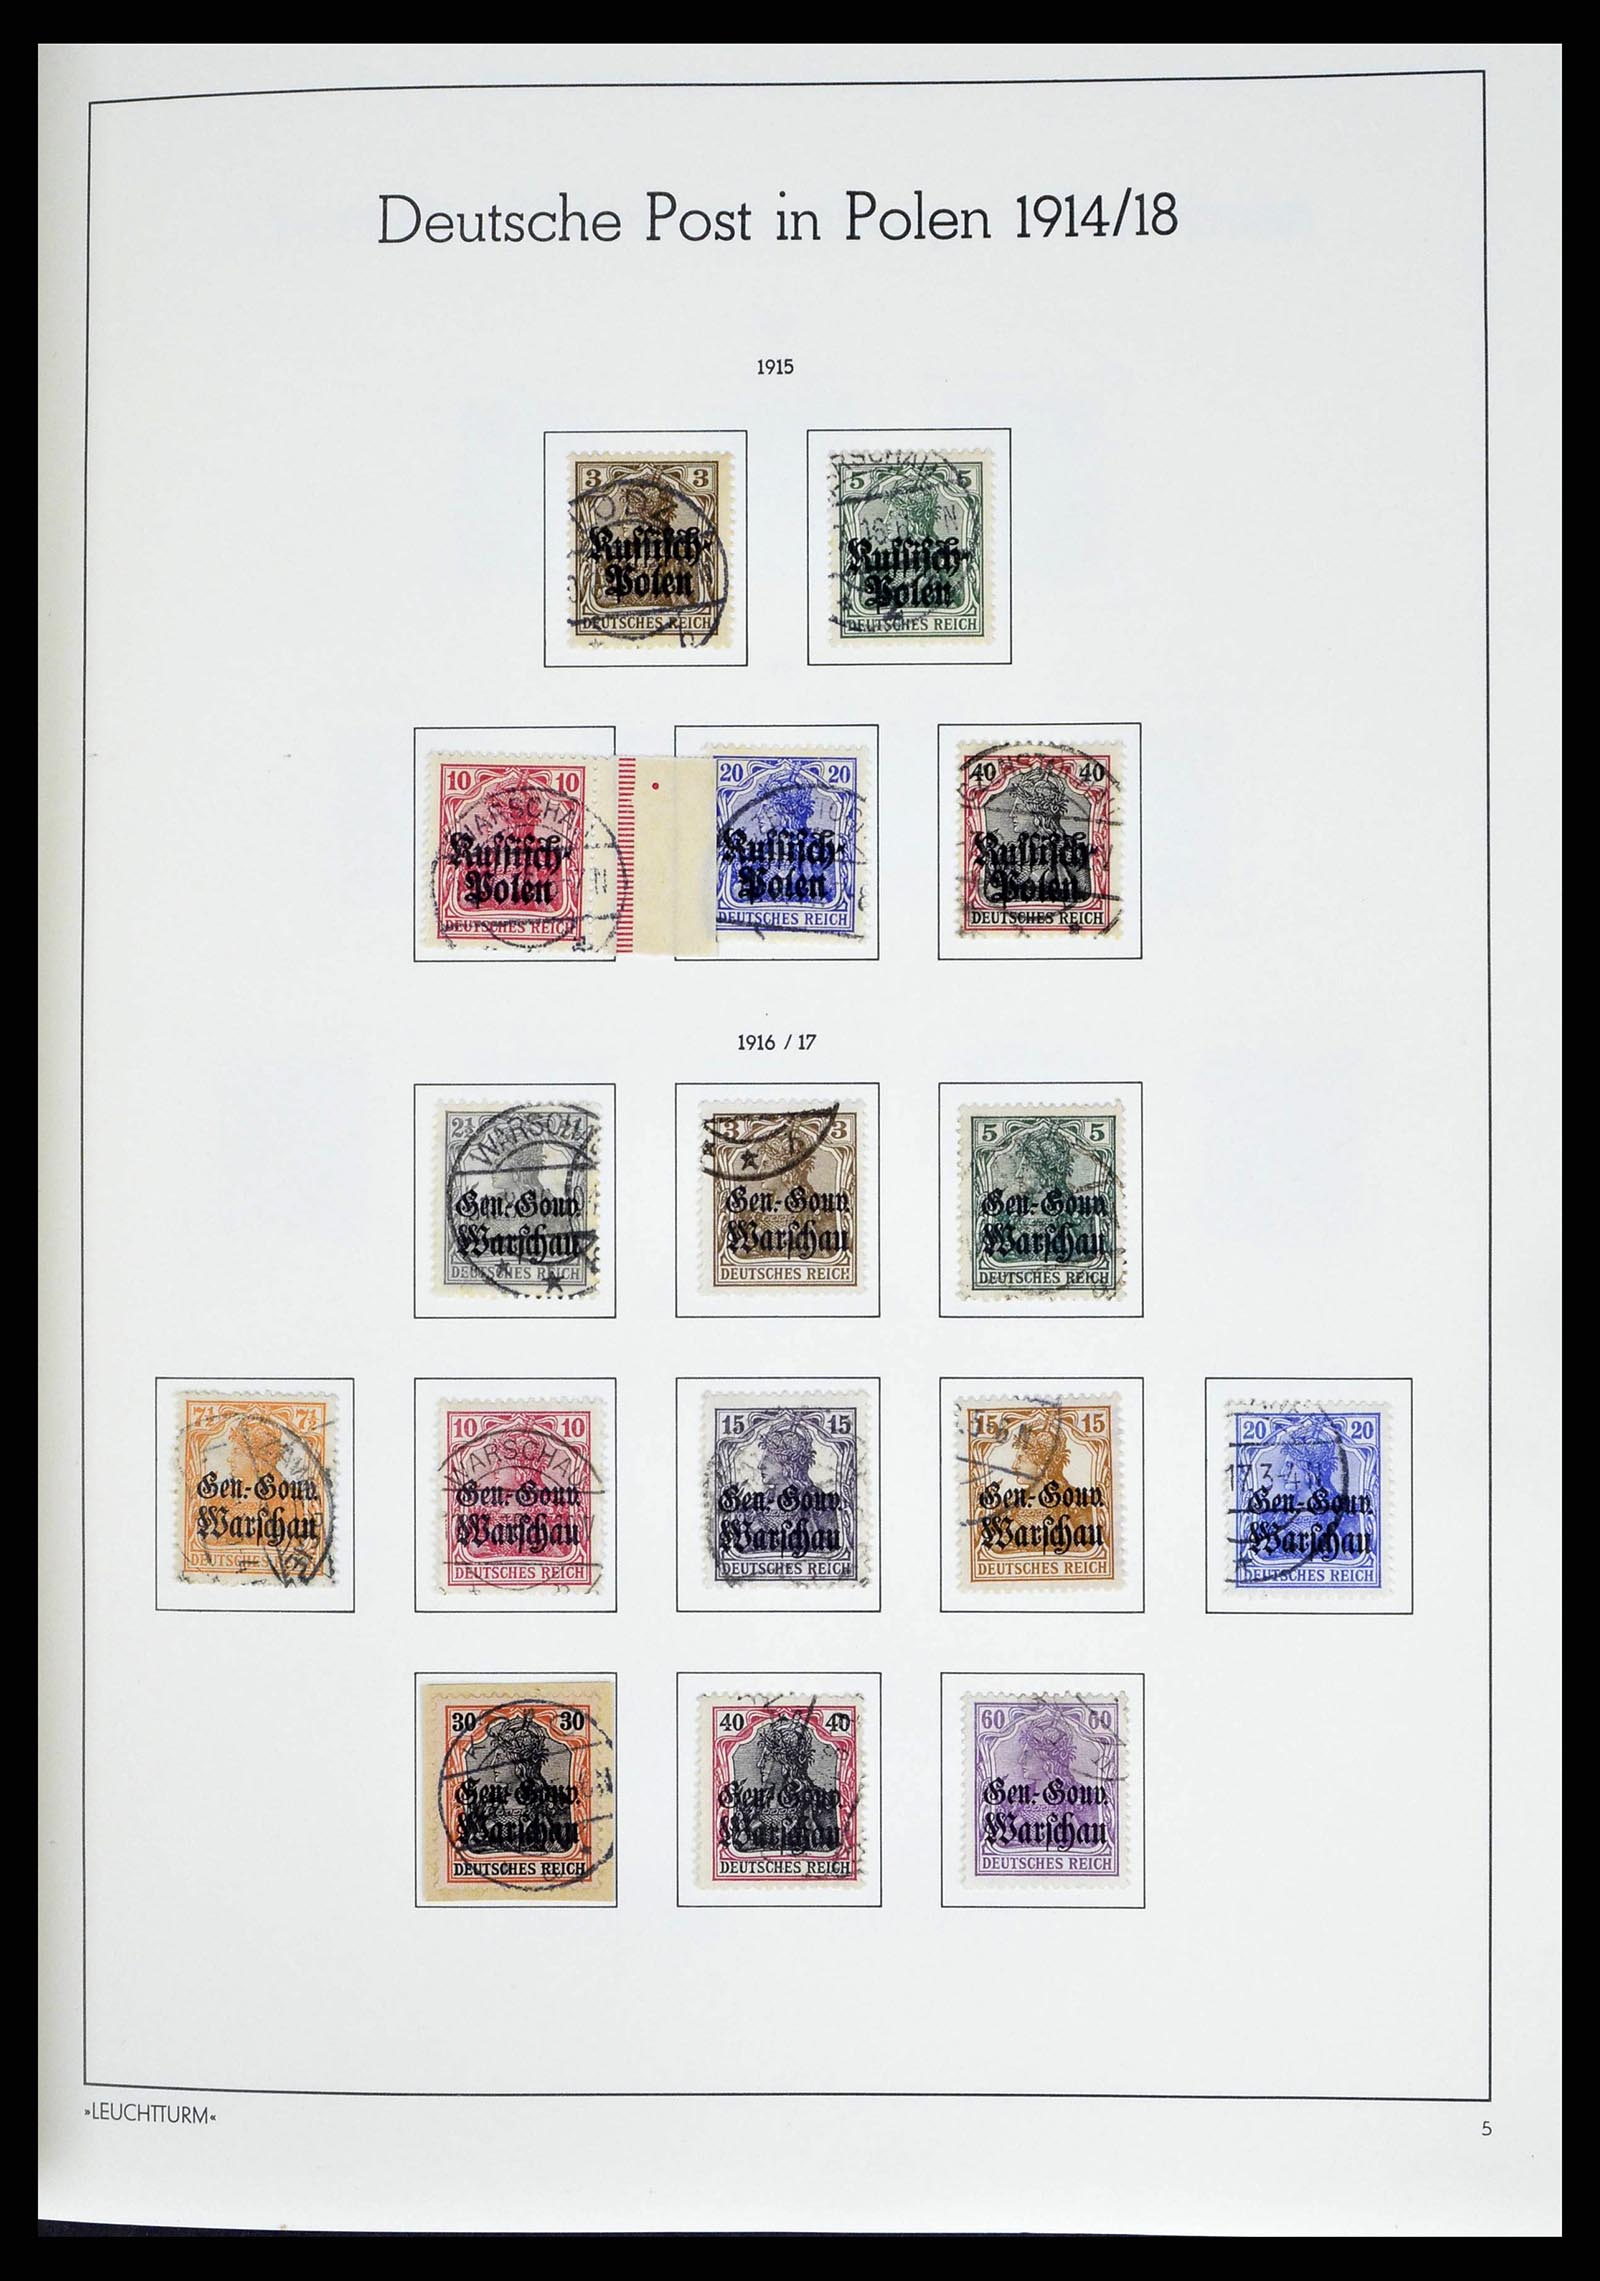 38501 0020 - Stamp collection 38501 German territories and occupations 1920-1945.